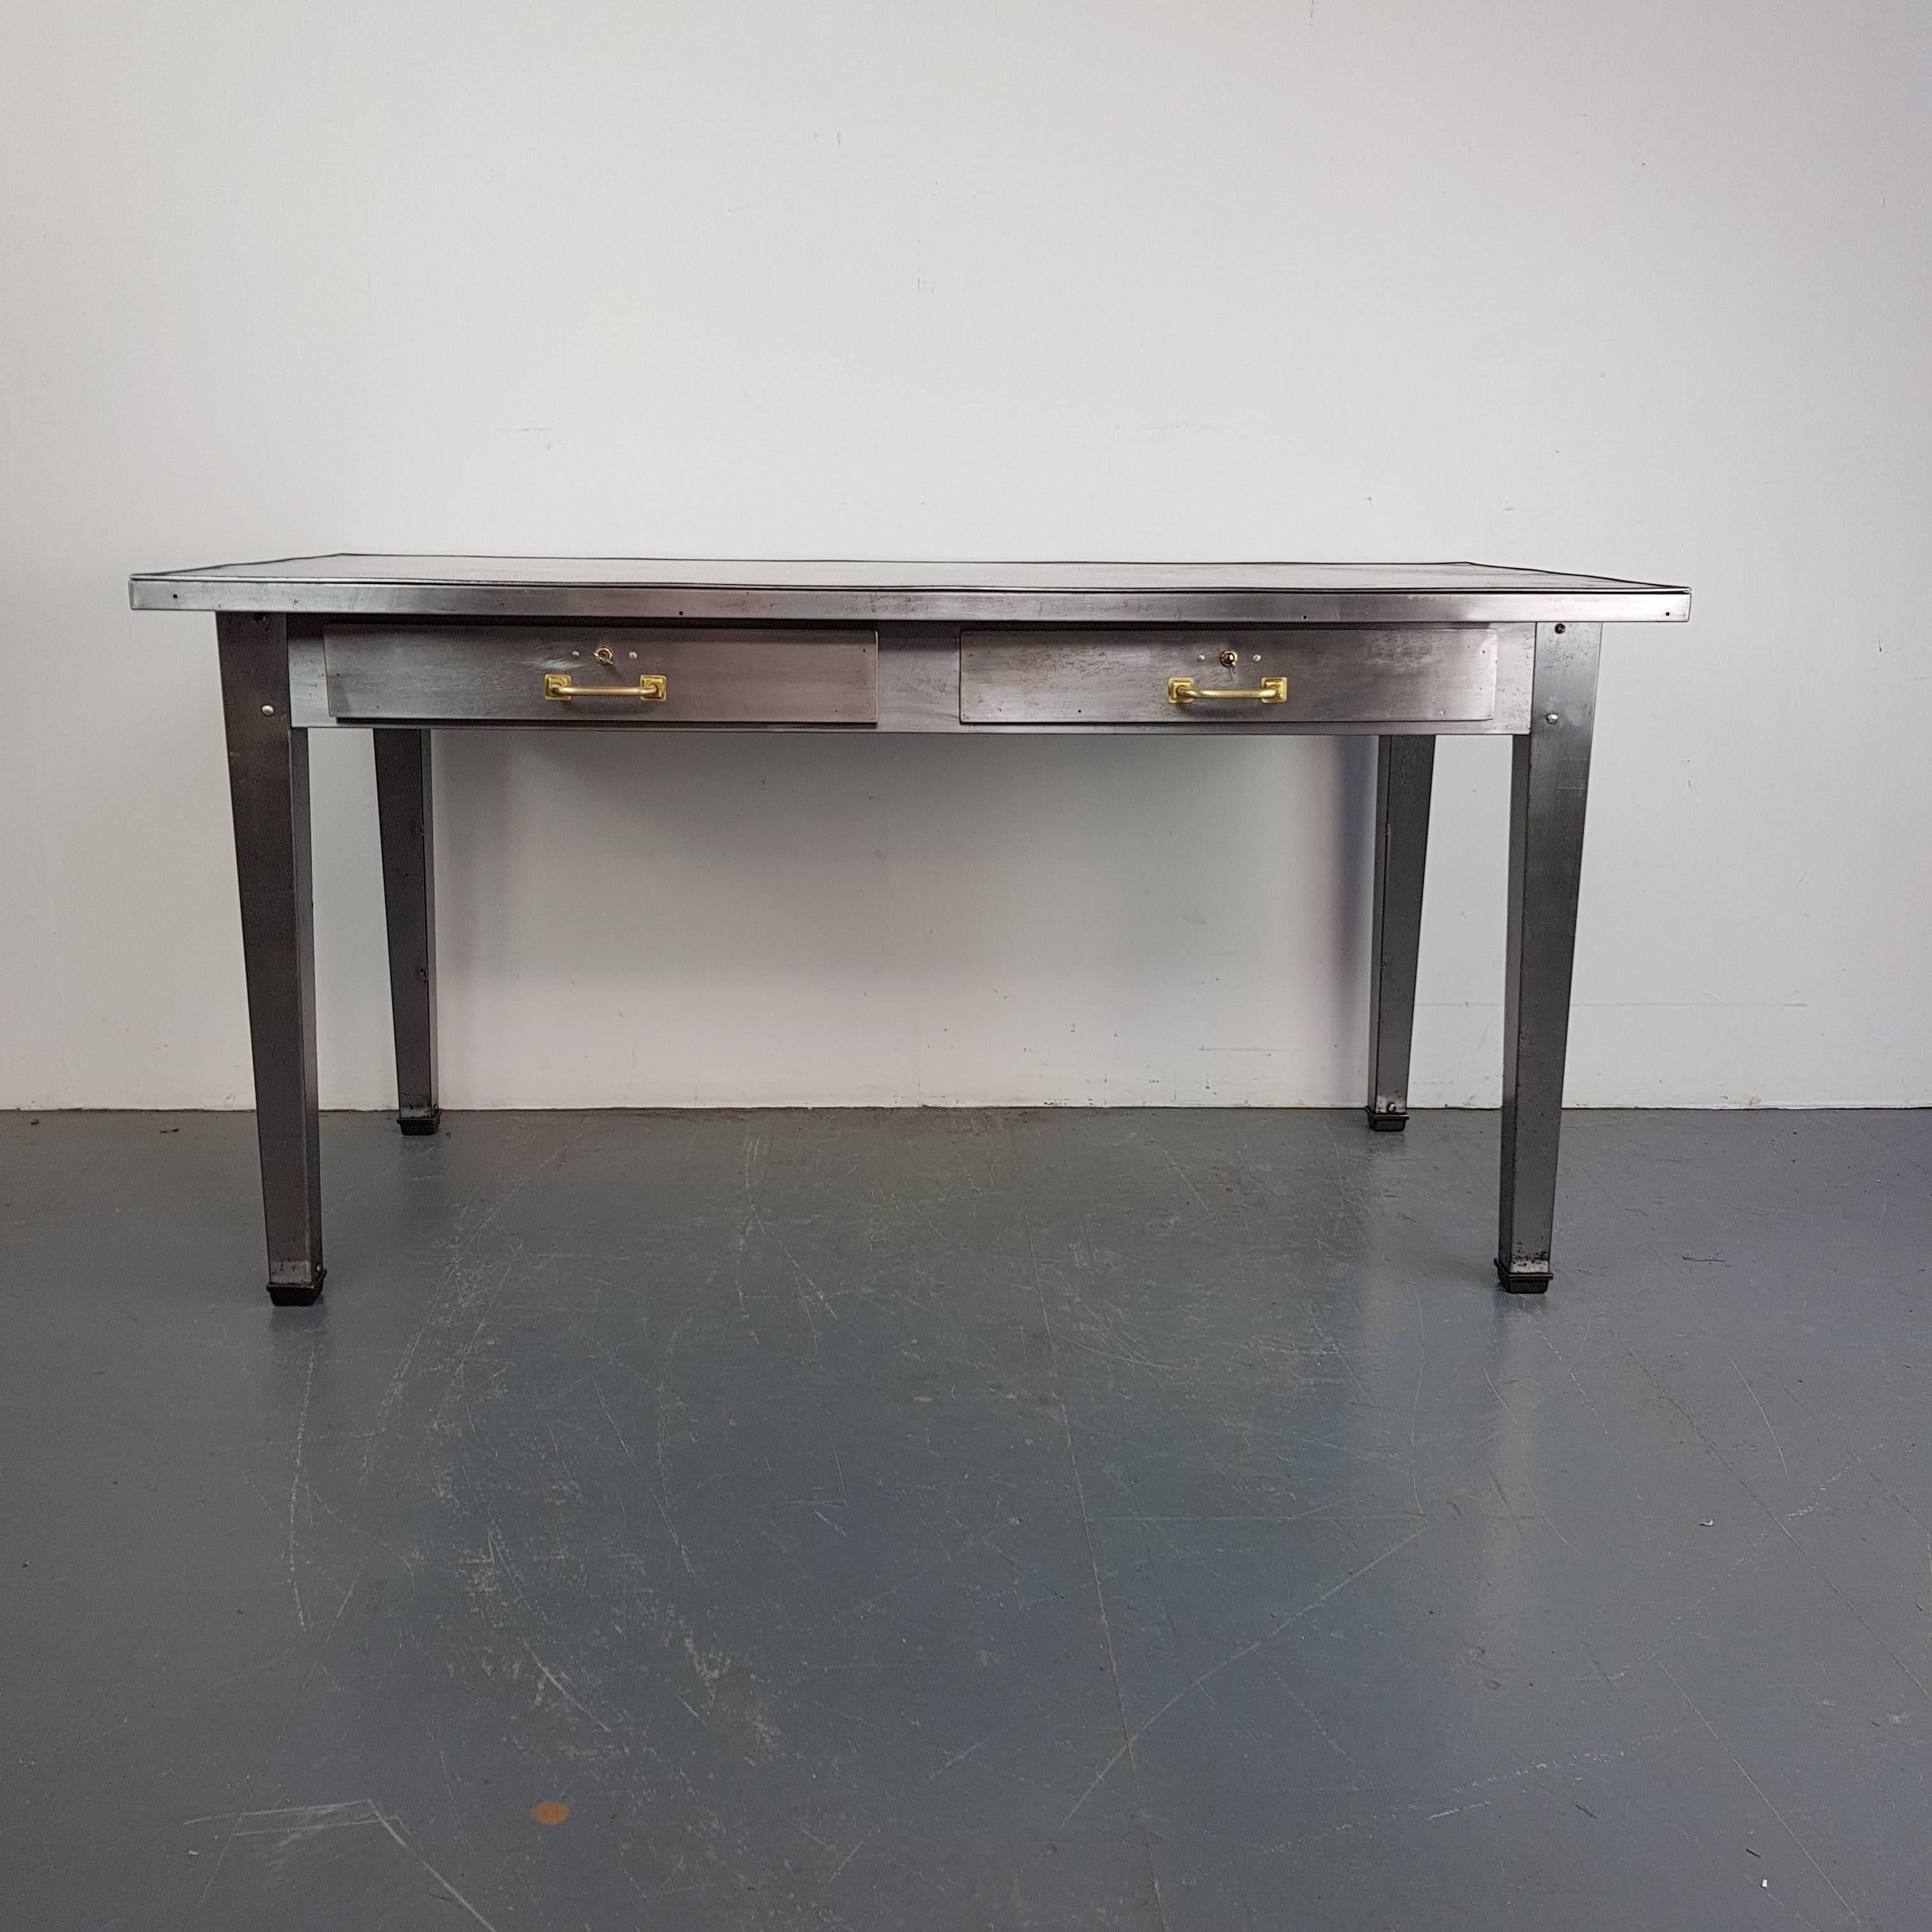 Lovely vintage industrial stripped and polished steel table with drawers with brass handles.

Working lock and key on one drawer.

In good vintage condition - this piece comes from a working industrial environment and so has signs of wear and